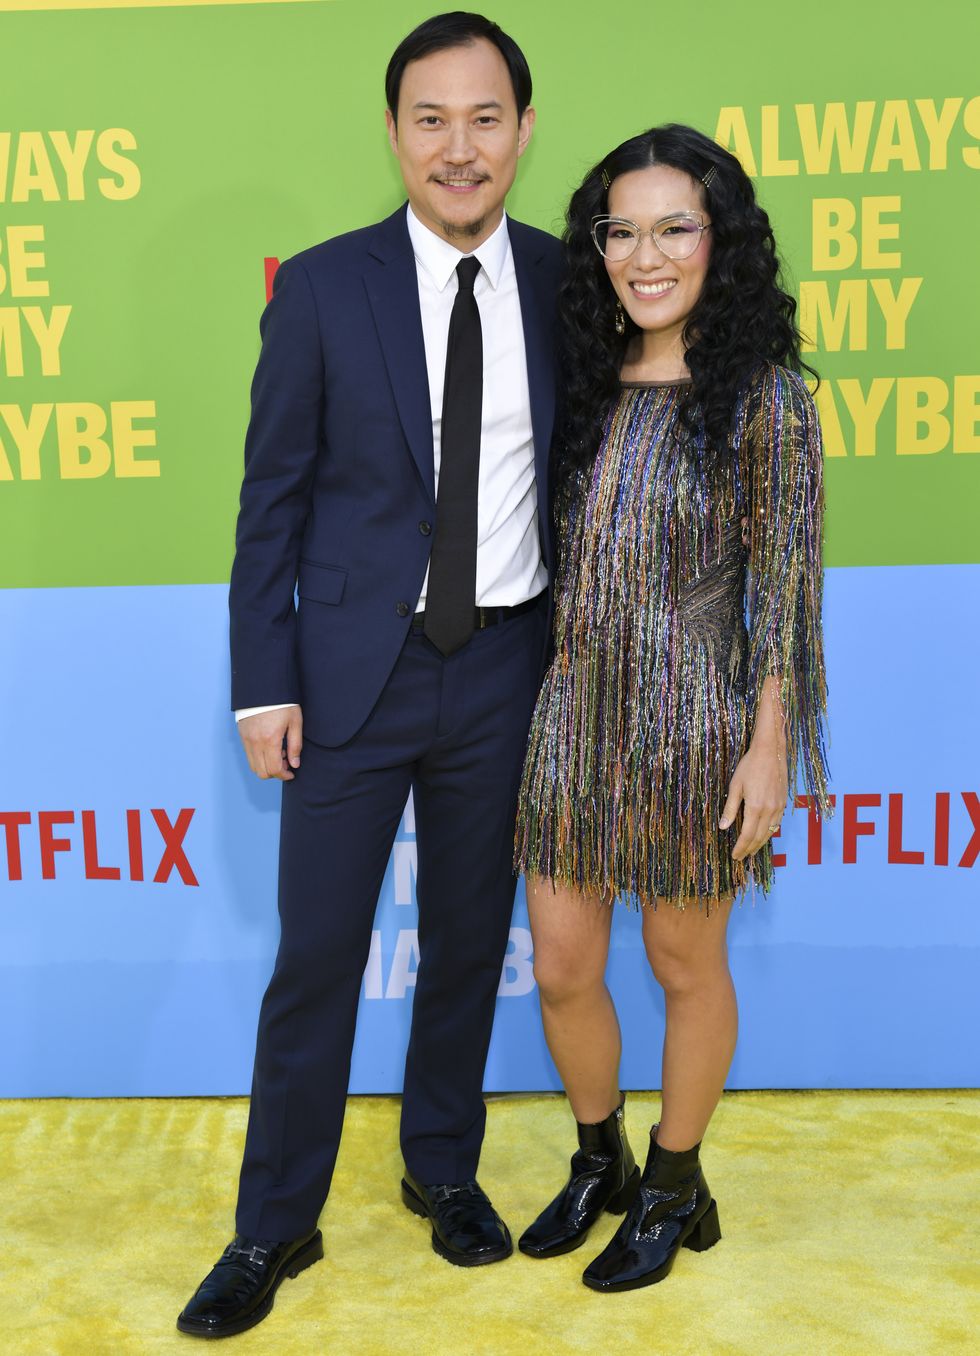 premiere of netflix's "always be my maybe" arrivals